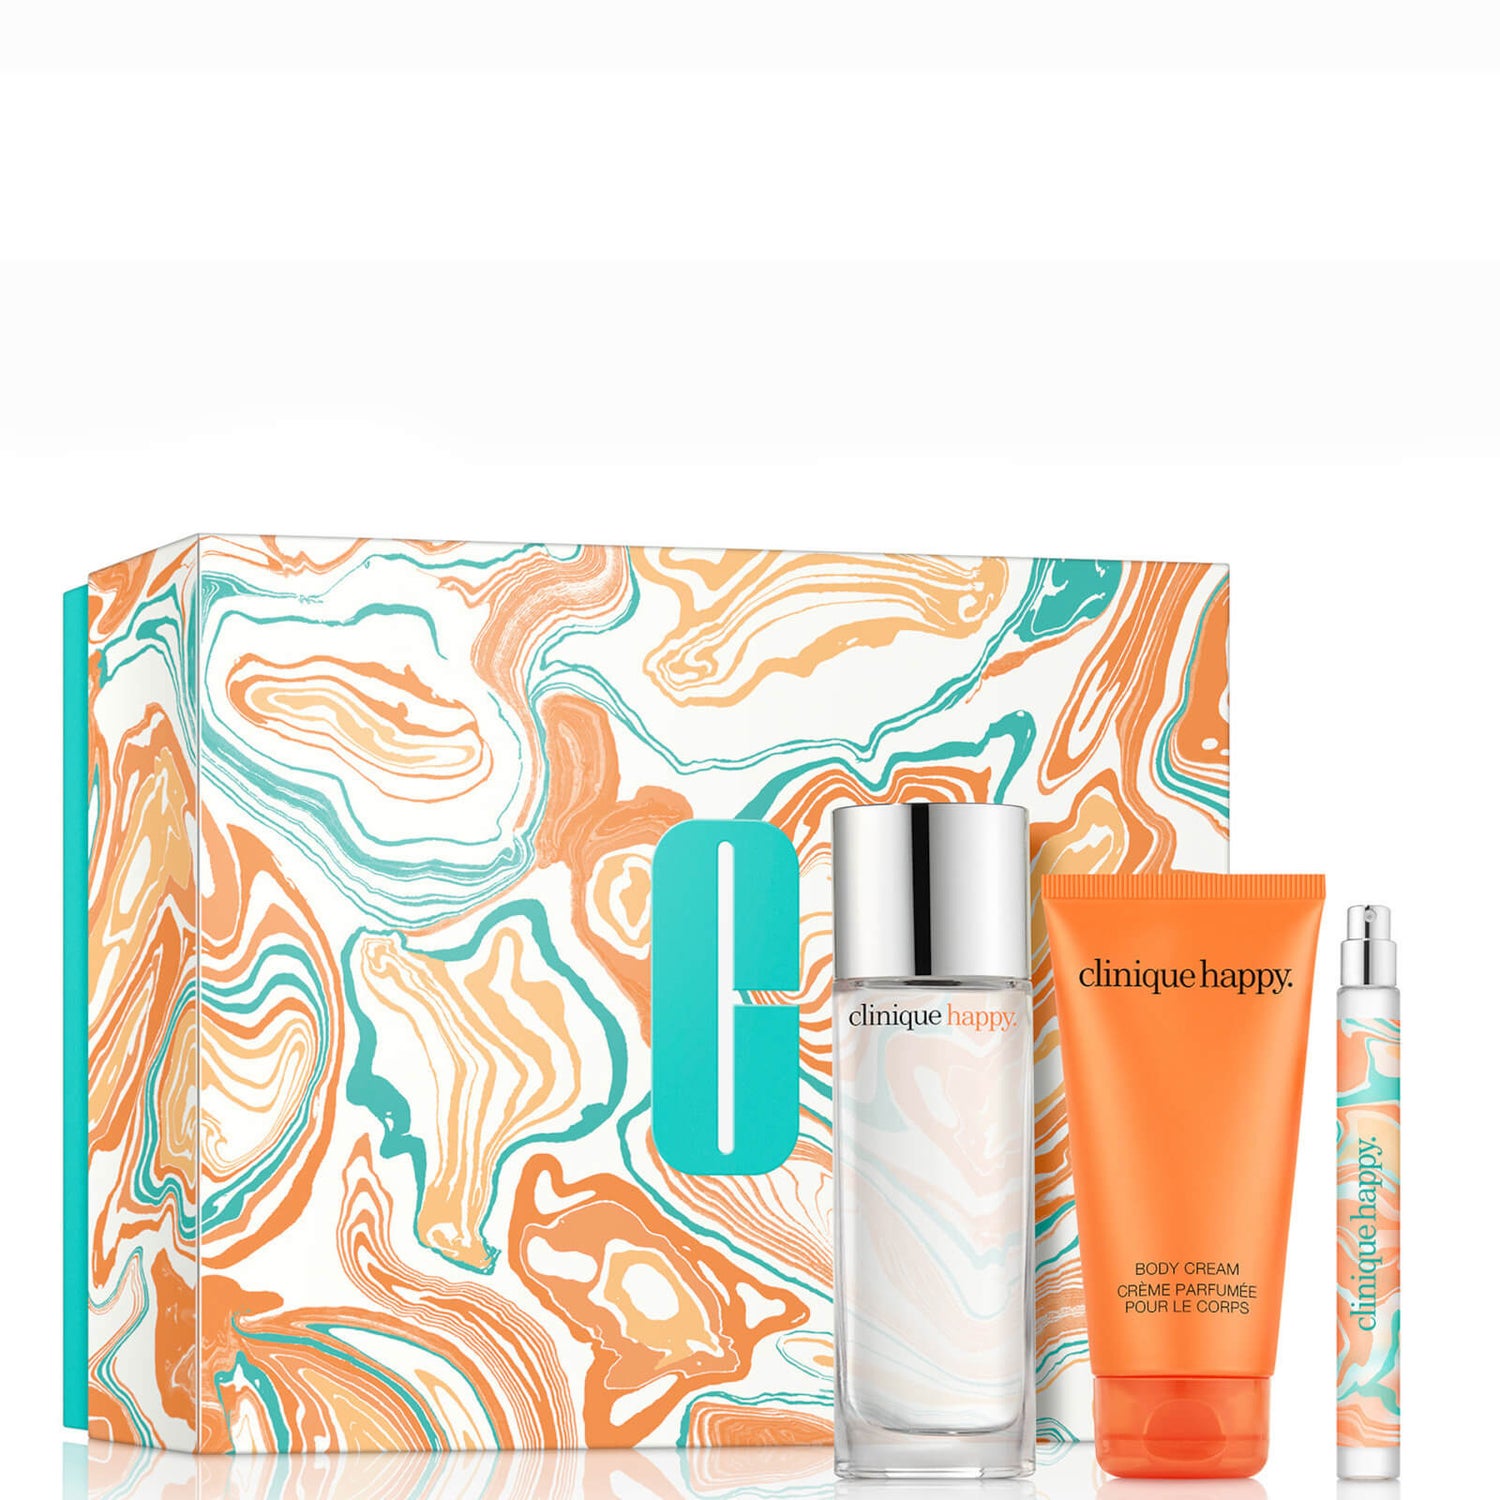 luister Geven Comorama Clinique Perfectly Happy Gift Set